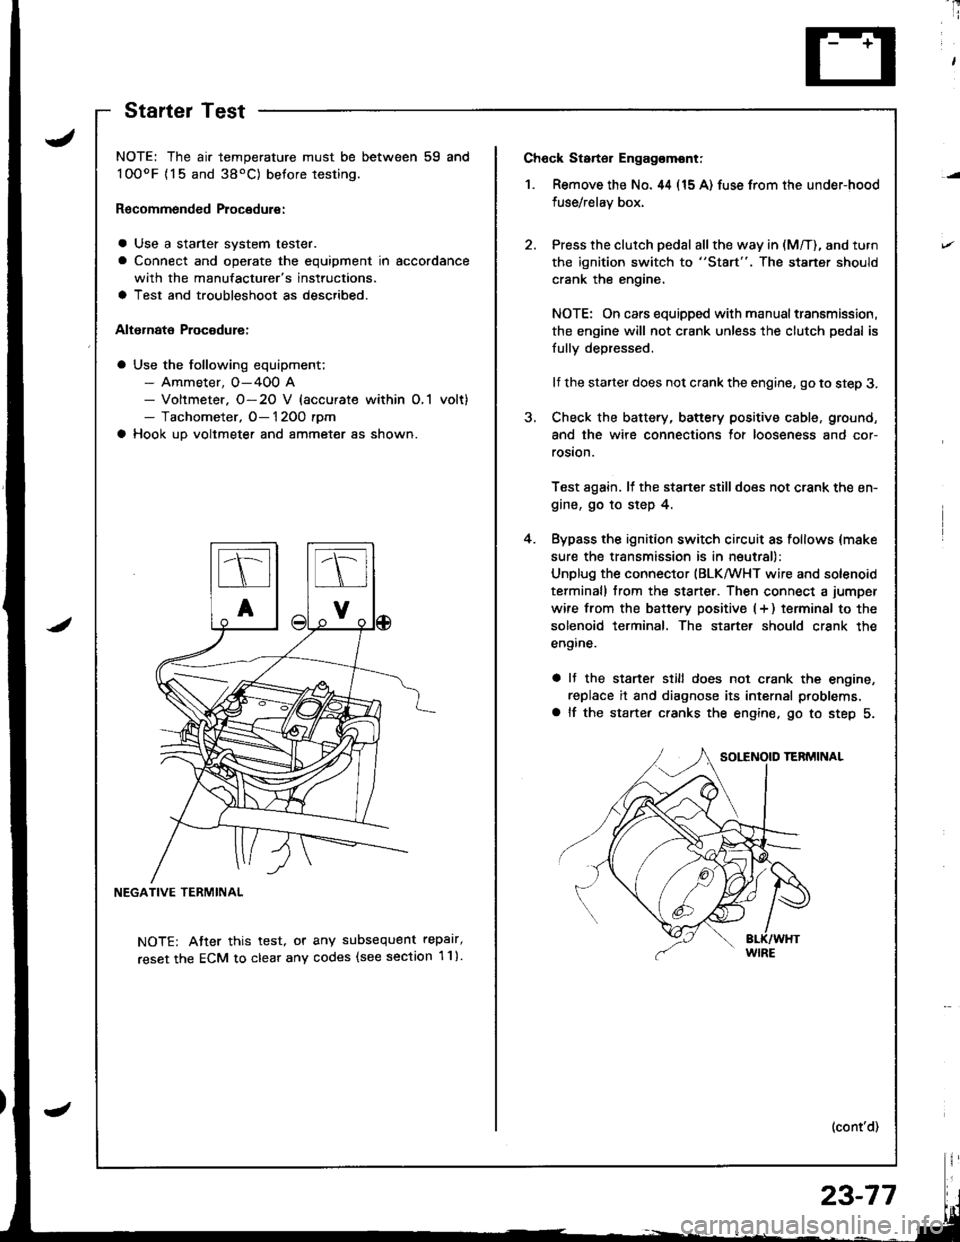 HONDA INTEGRA 1998 4.G Workshop Manual Ch6ck Starter Engag€mont;
1. Remove the No. 44 (15 A) fuse from the under-hood
fuse/relay box,
Press the clutch pedal all the way in (M/T), and turn
the ignition switch to "St8rt". The staner should